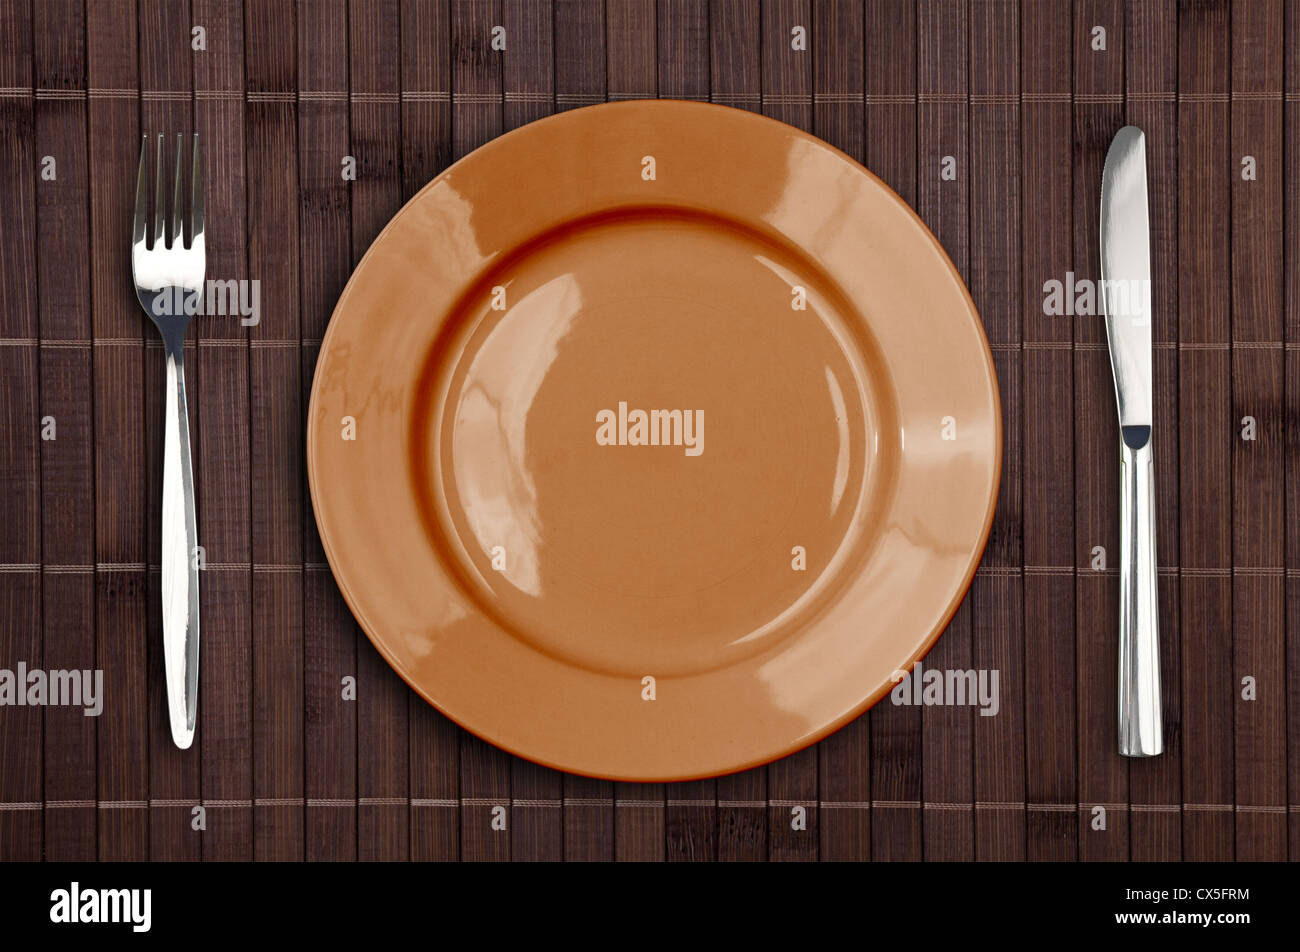 Bamboo placemat with plate fork and knife Stock Photo